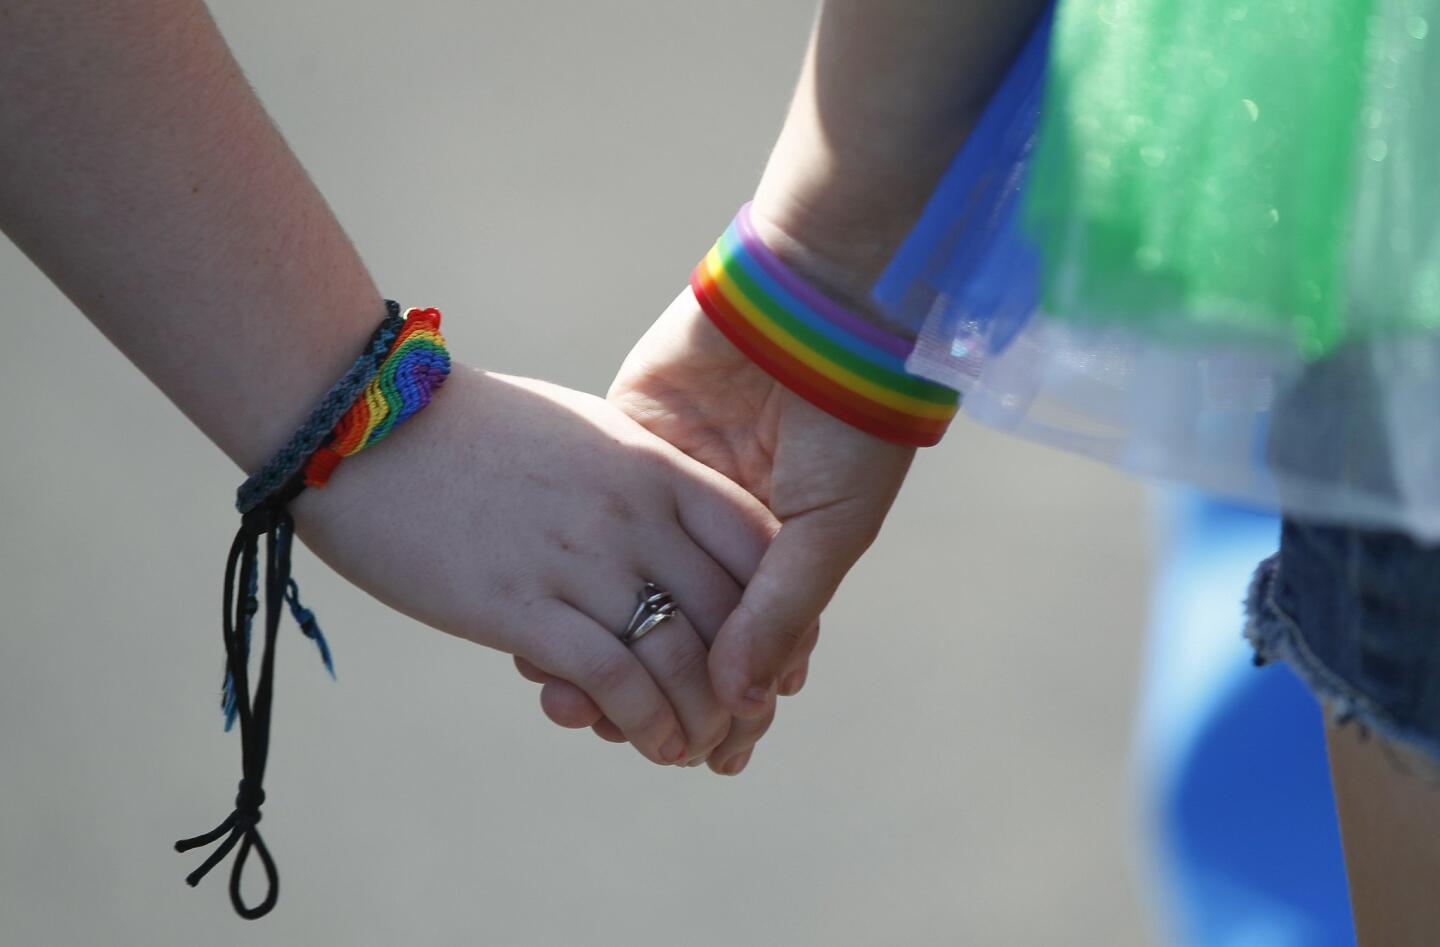 Roxy Fernstrom, right, and Megan Kelly hold hands while at the seventh annual Pride By the Beach event in Oceanside on Saturday, October 11, 2014.